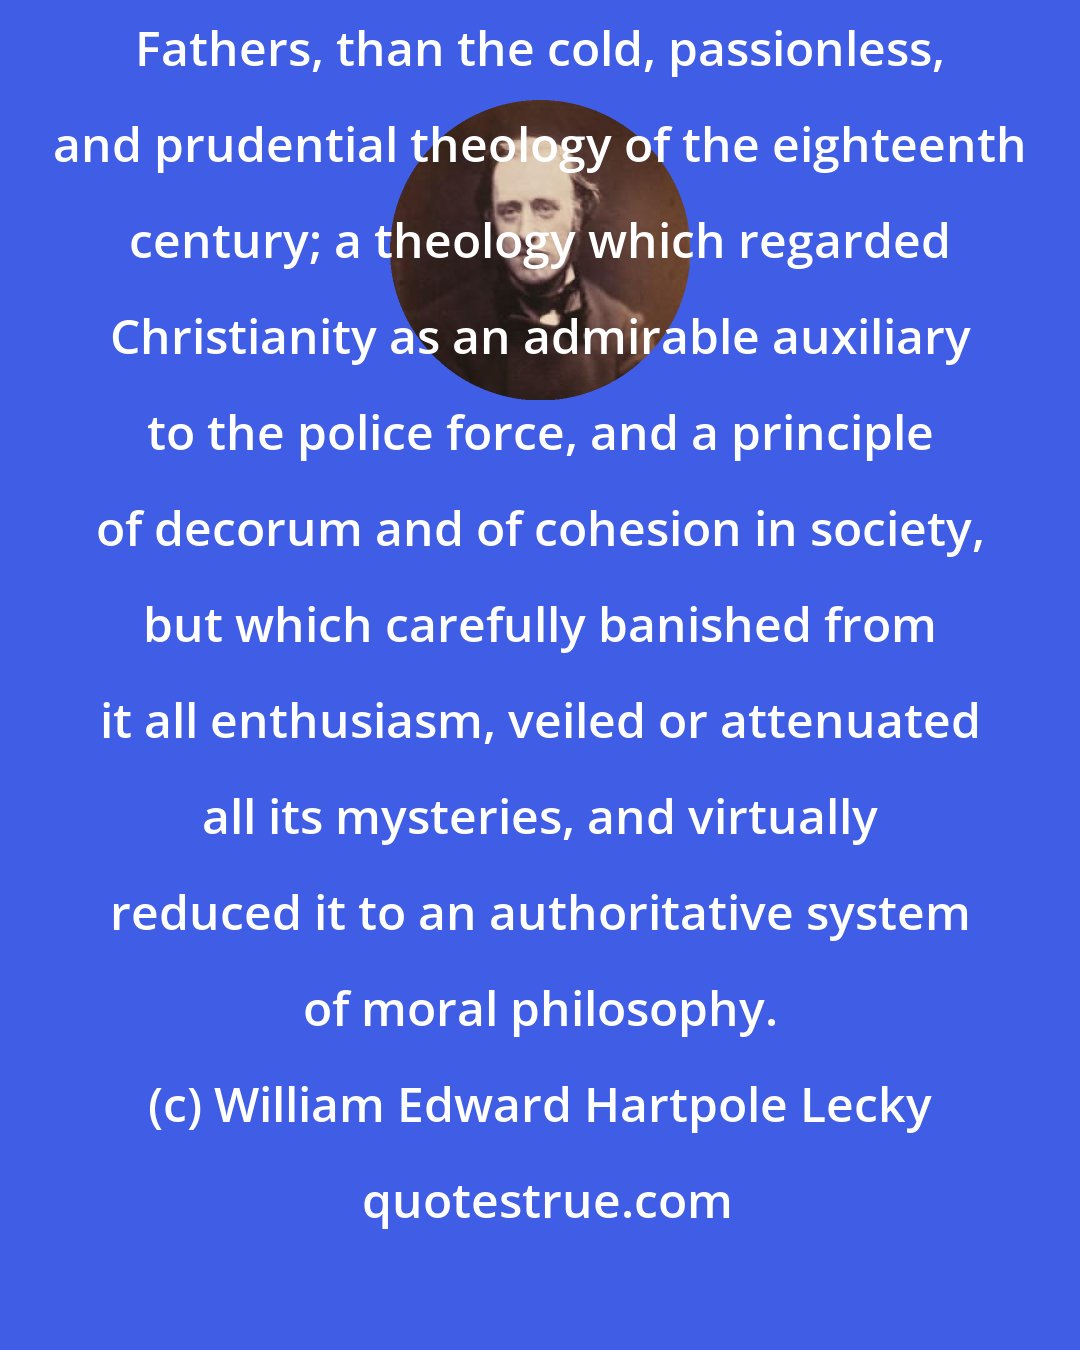 William Edward Hartpole Lecky: Nothing, indeed, could be more unlike the tone of the [Patristic] Fathers, than the cold, passionless, and prudential theology of the eighteenth century; a theology which regarded Christianity as an admirable auxiliary to the police force, and a principle of decorum and of cohesion in society, but which carefully banished from it all enthusiasm, veiled or attenuated all its mysteries, and virtually reduced it to an authoritative system of moral philosophy.